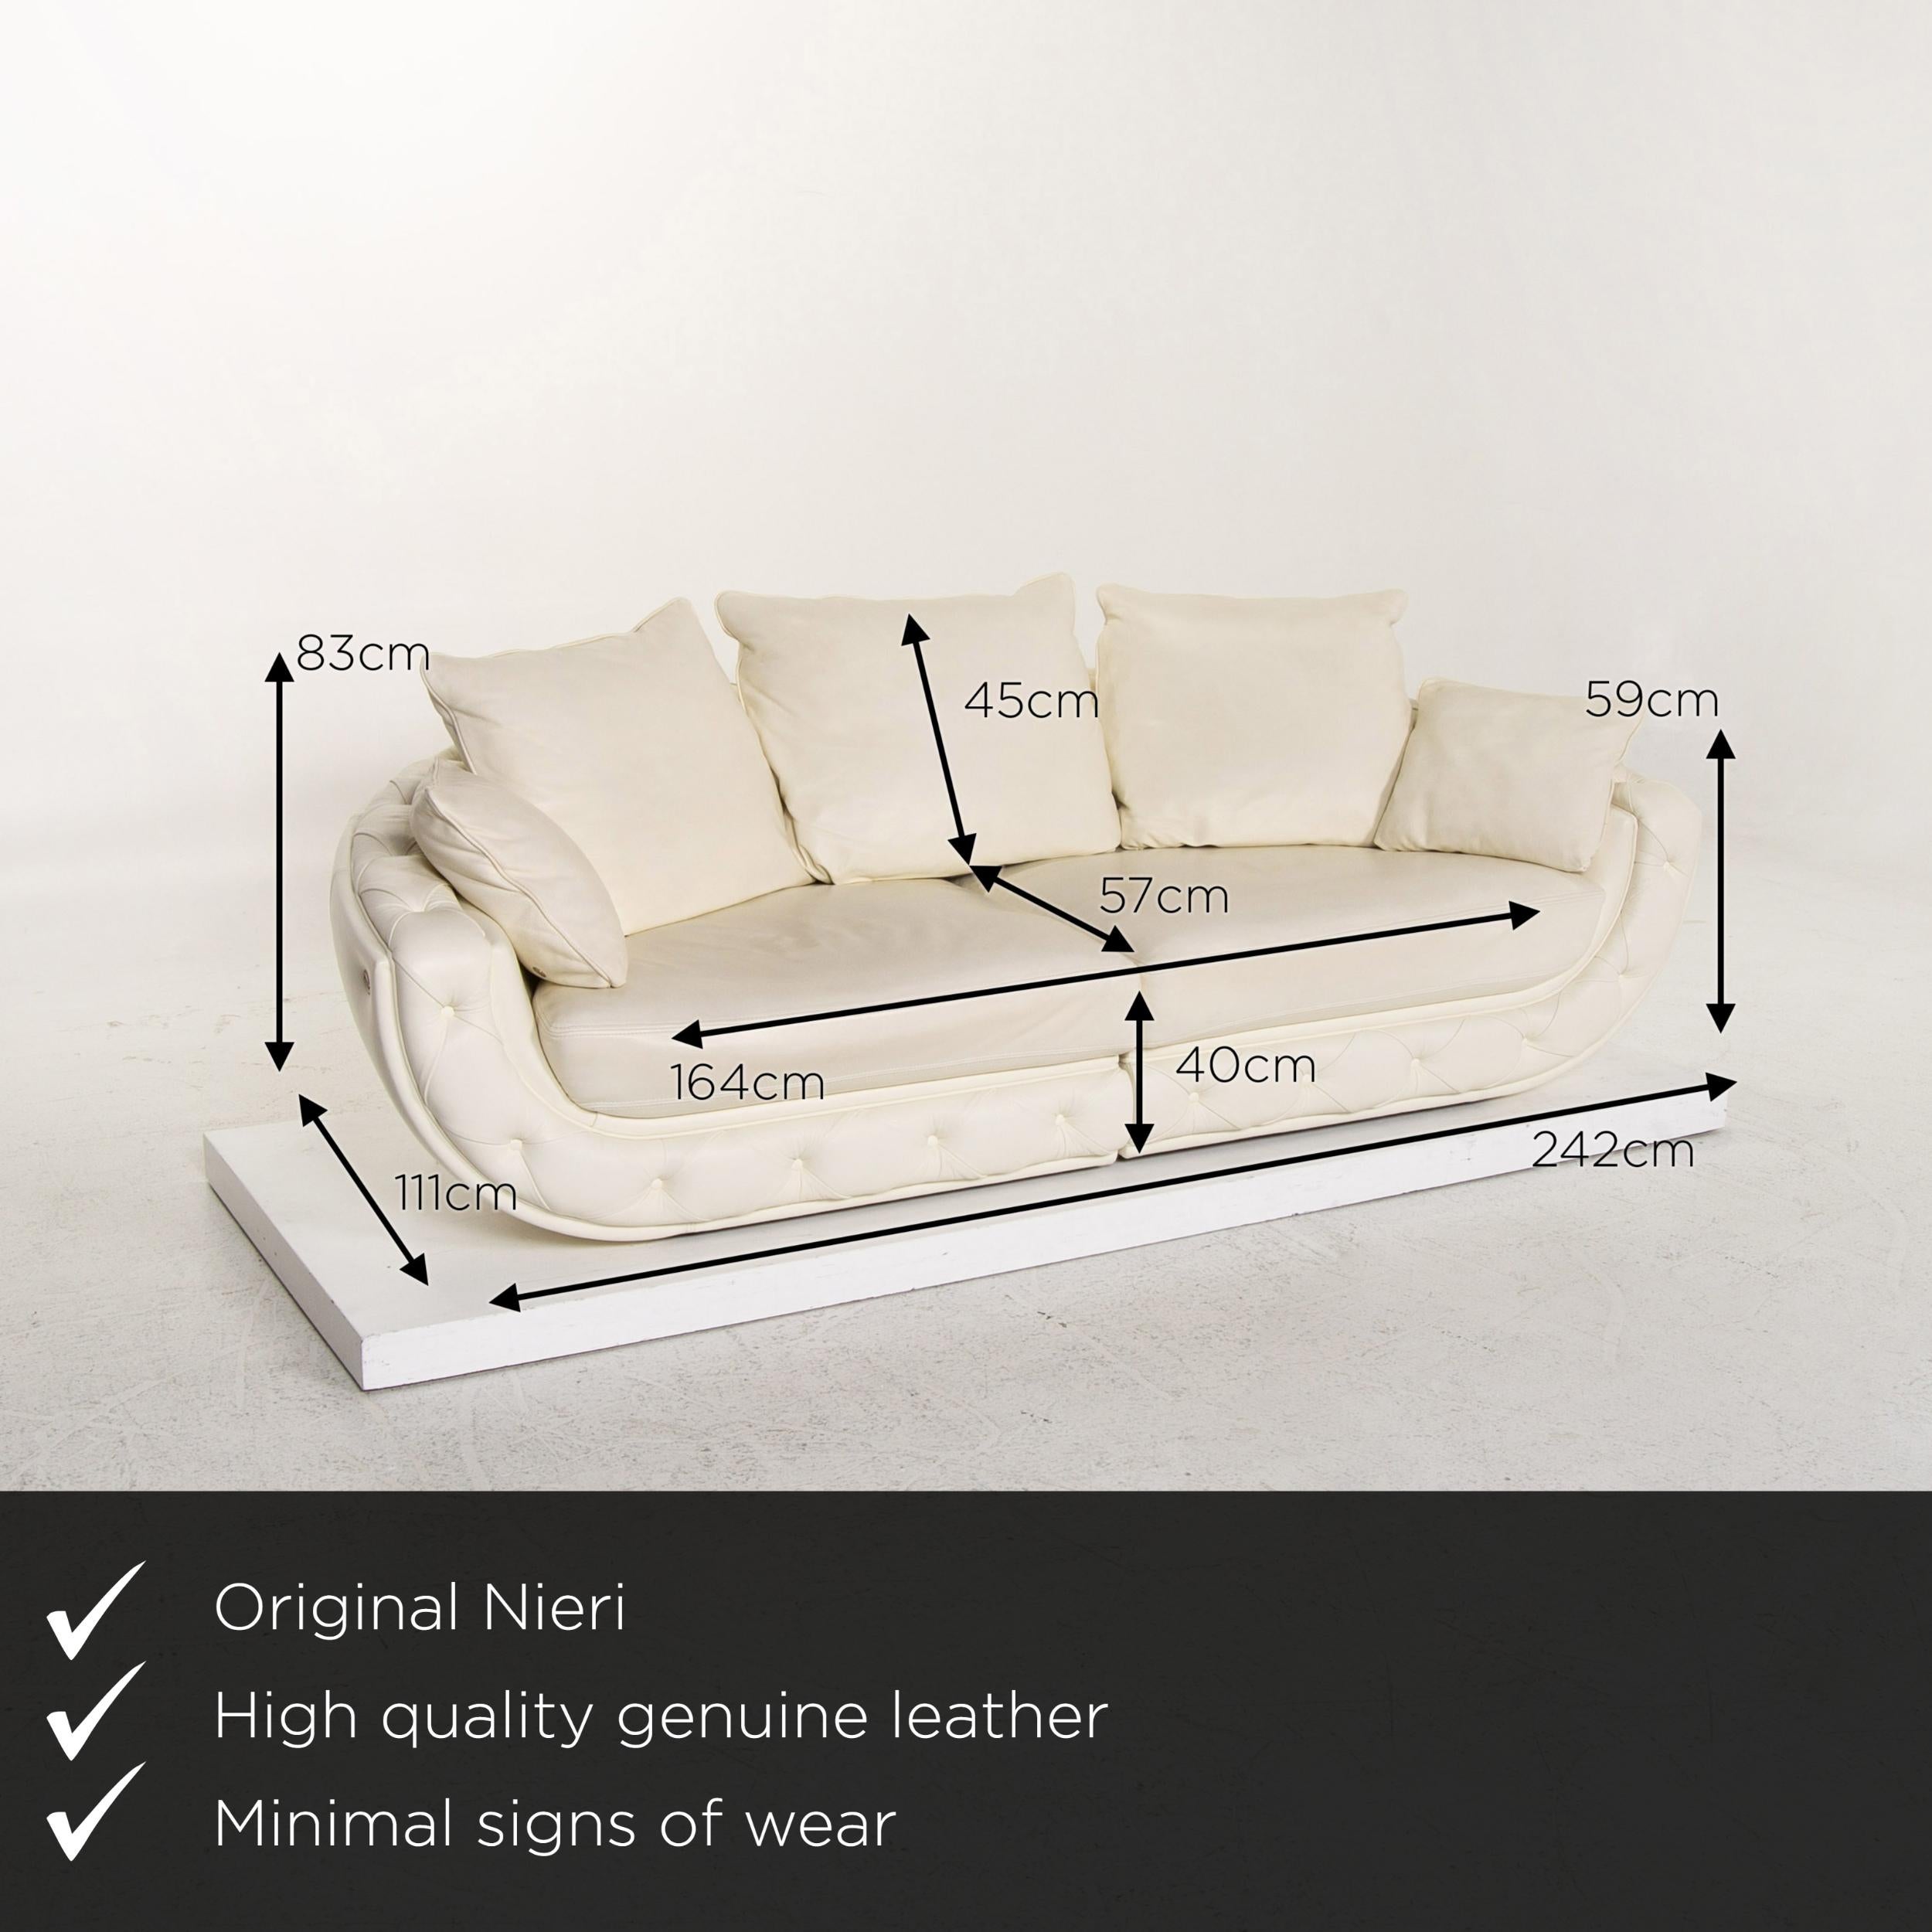 We present to you a Nieri leather sofa cream four-seat couch.

 

 Product measurements in centimeters:
 

Depth 111
Width 242
Height 83
Seat height 40
Rest height 59
Seat depth 57
Seat width 164
Back height 45.